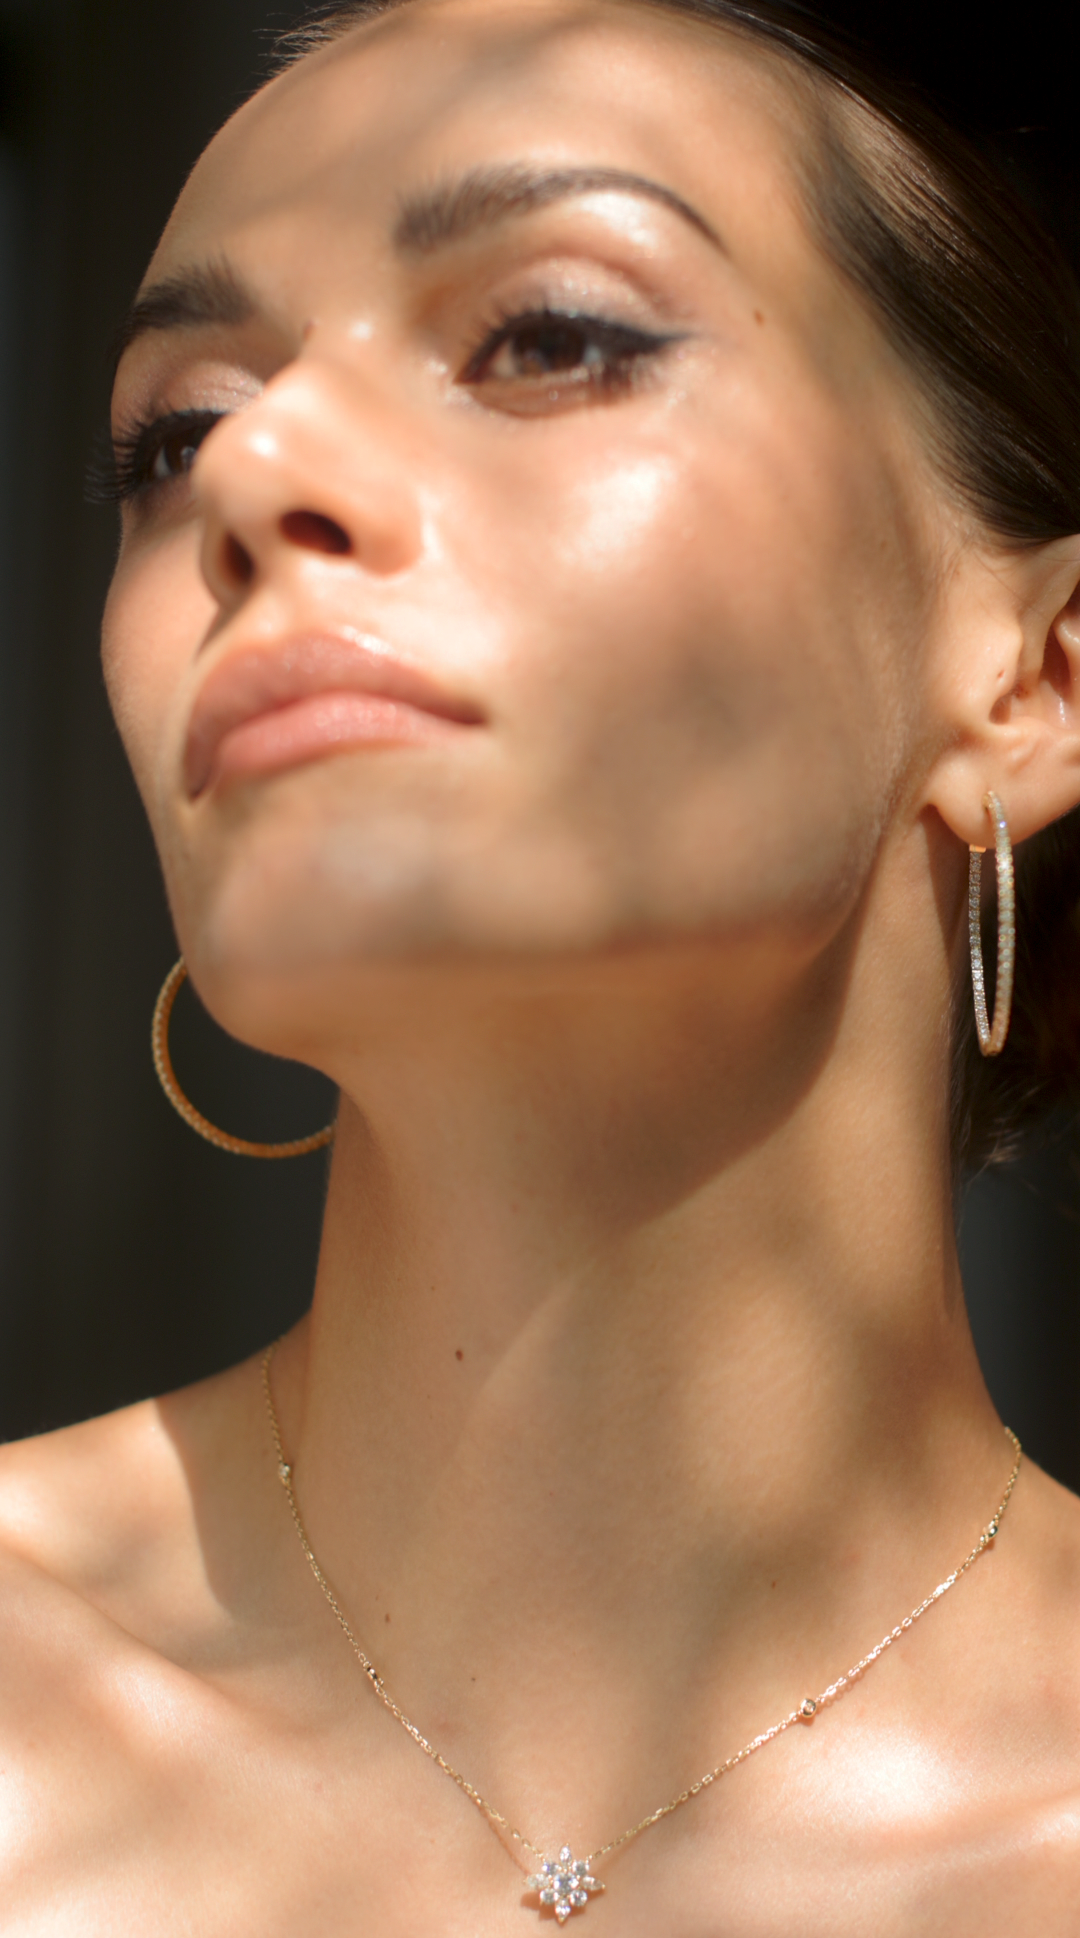 Paloma Large Hoops Gold Vermeil